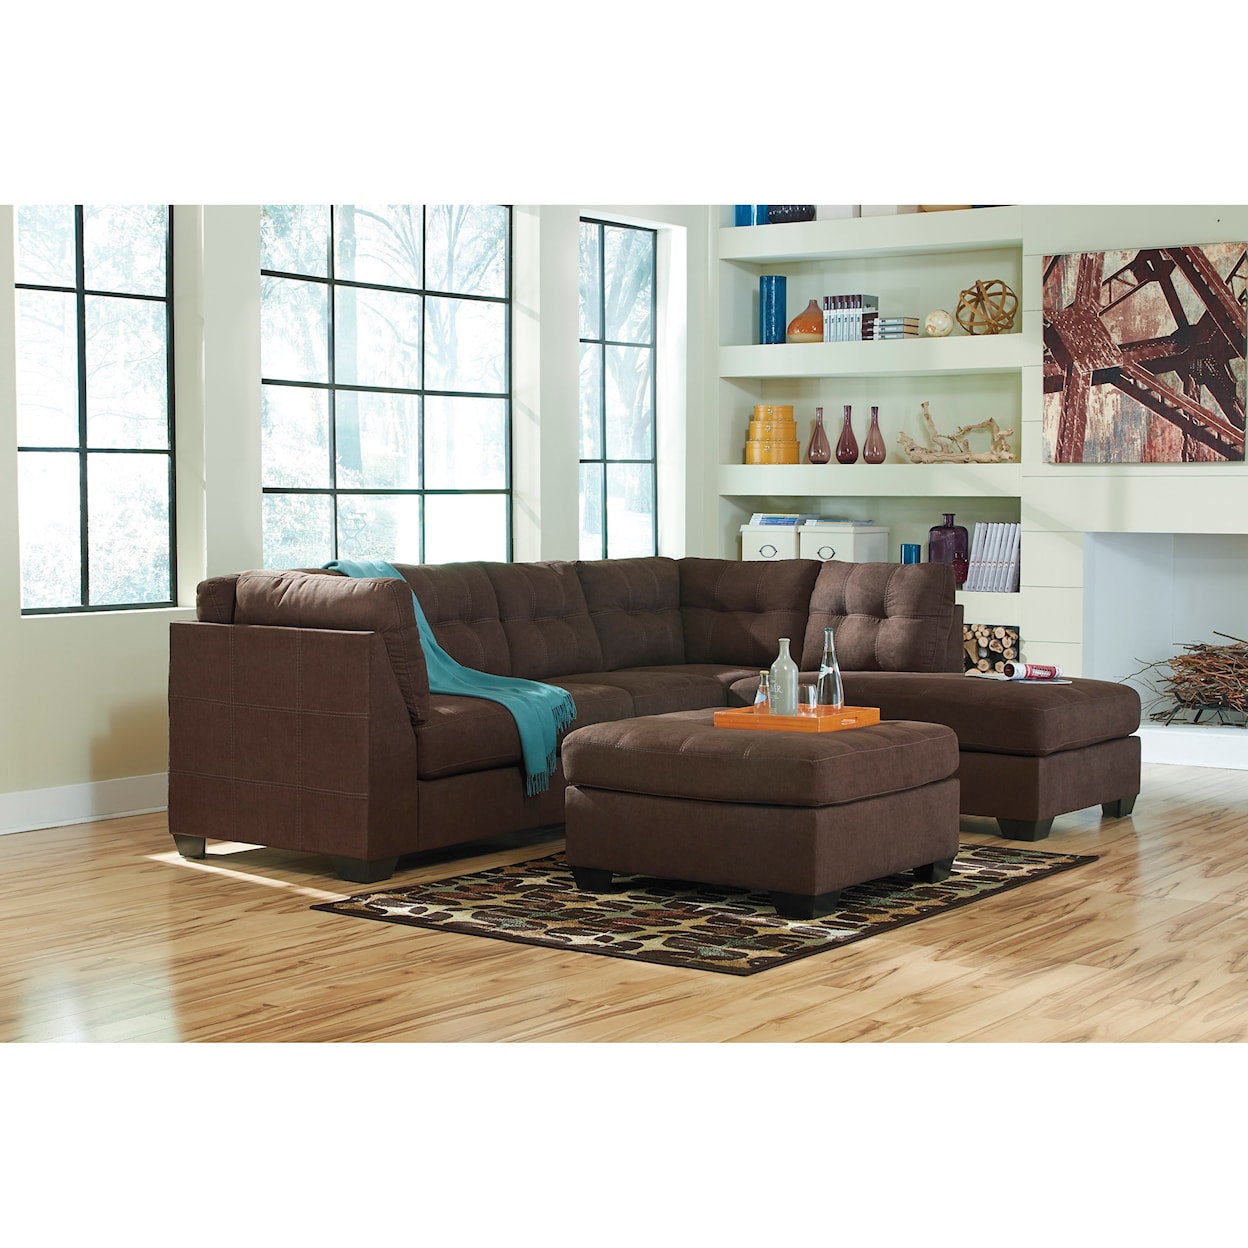 Benchcraft Maier Living Room Group